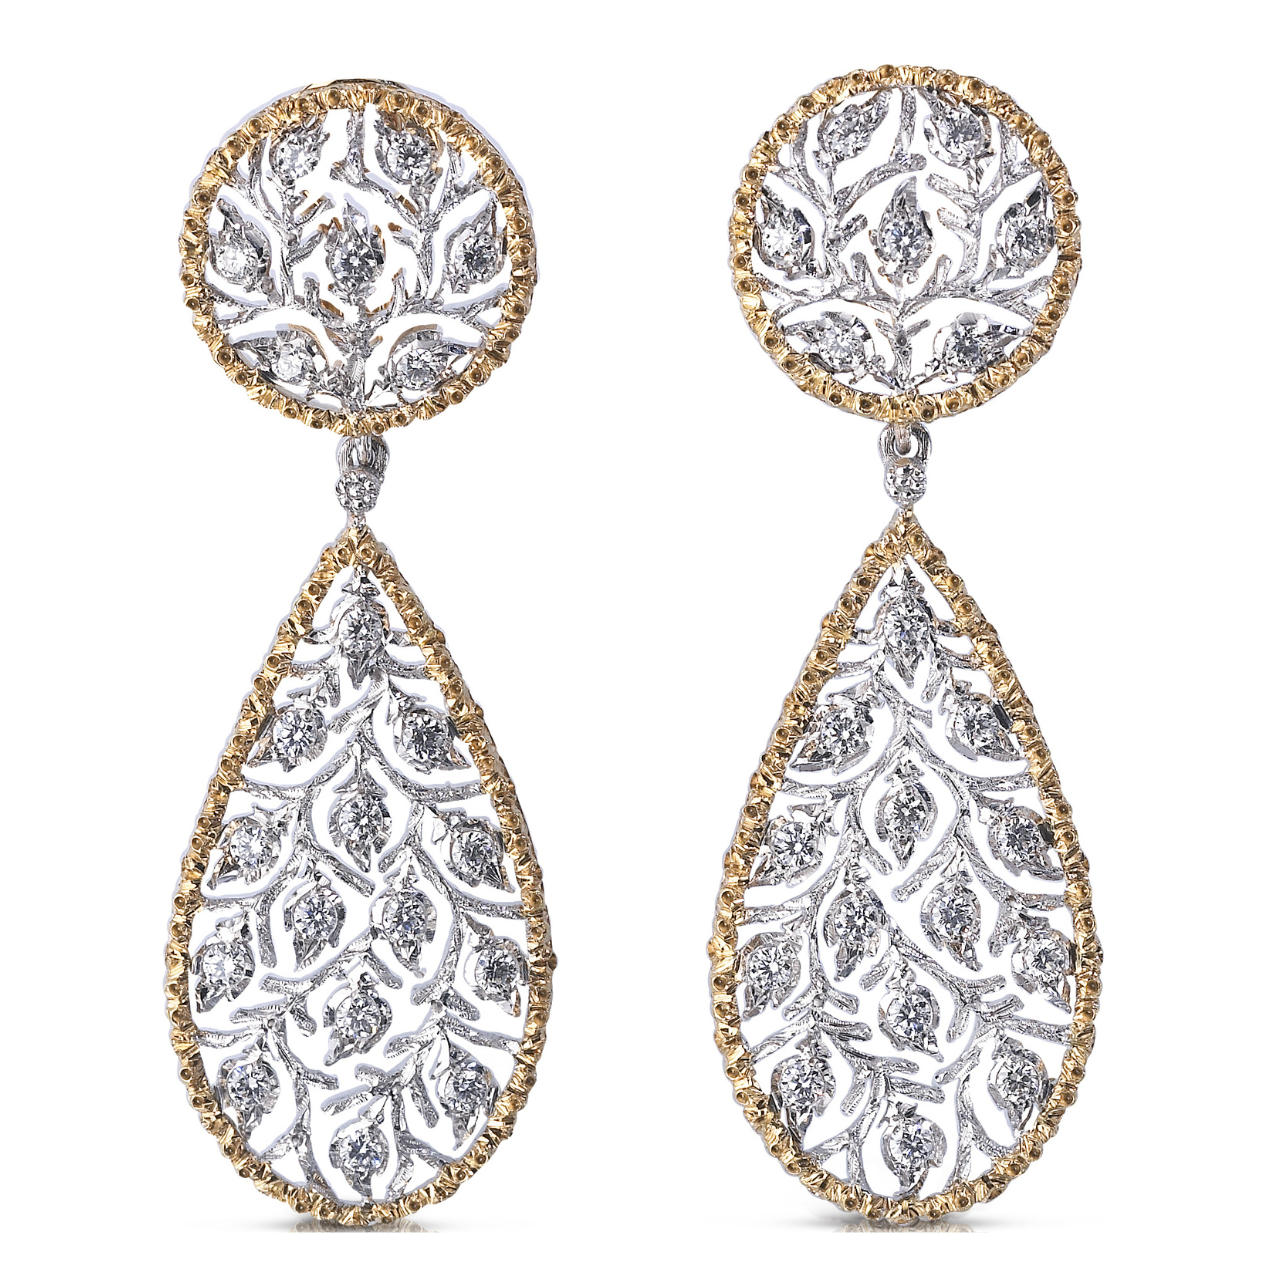 Buccellati ramage drop earrings with diamond floral detailing and gold trim